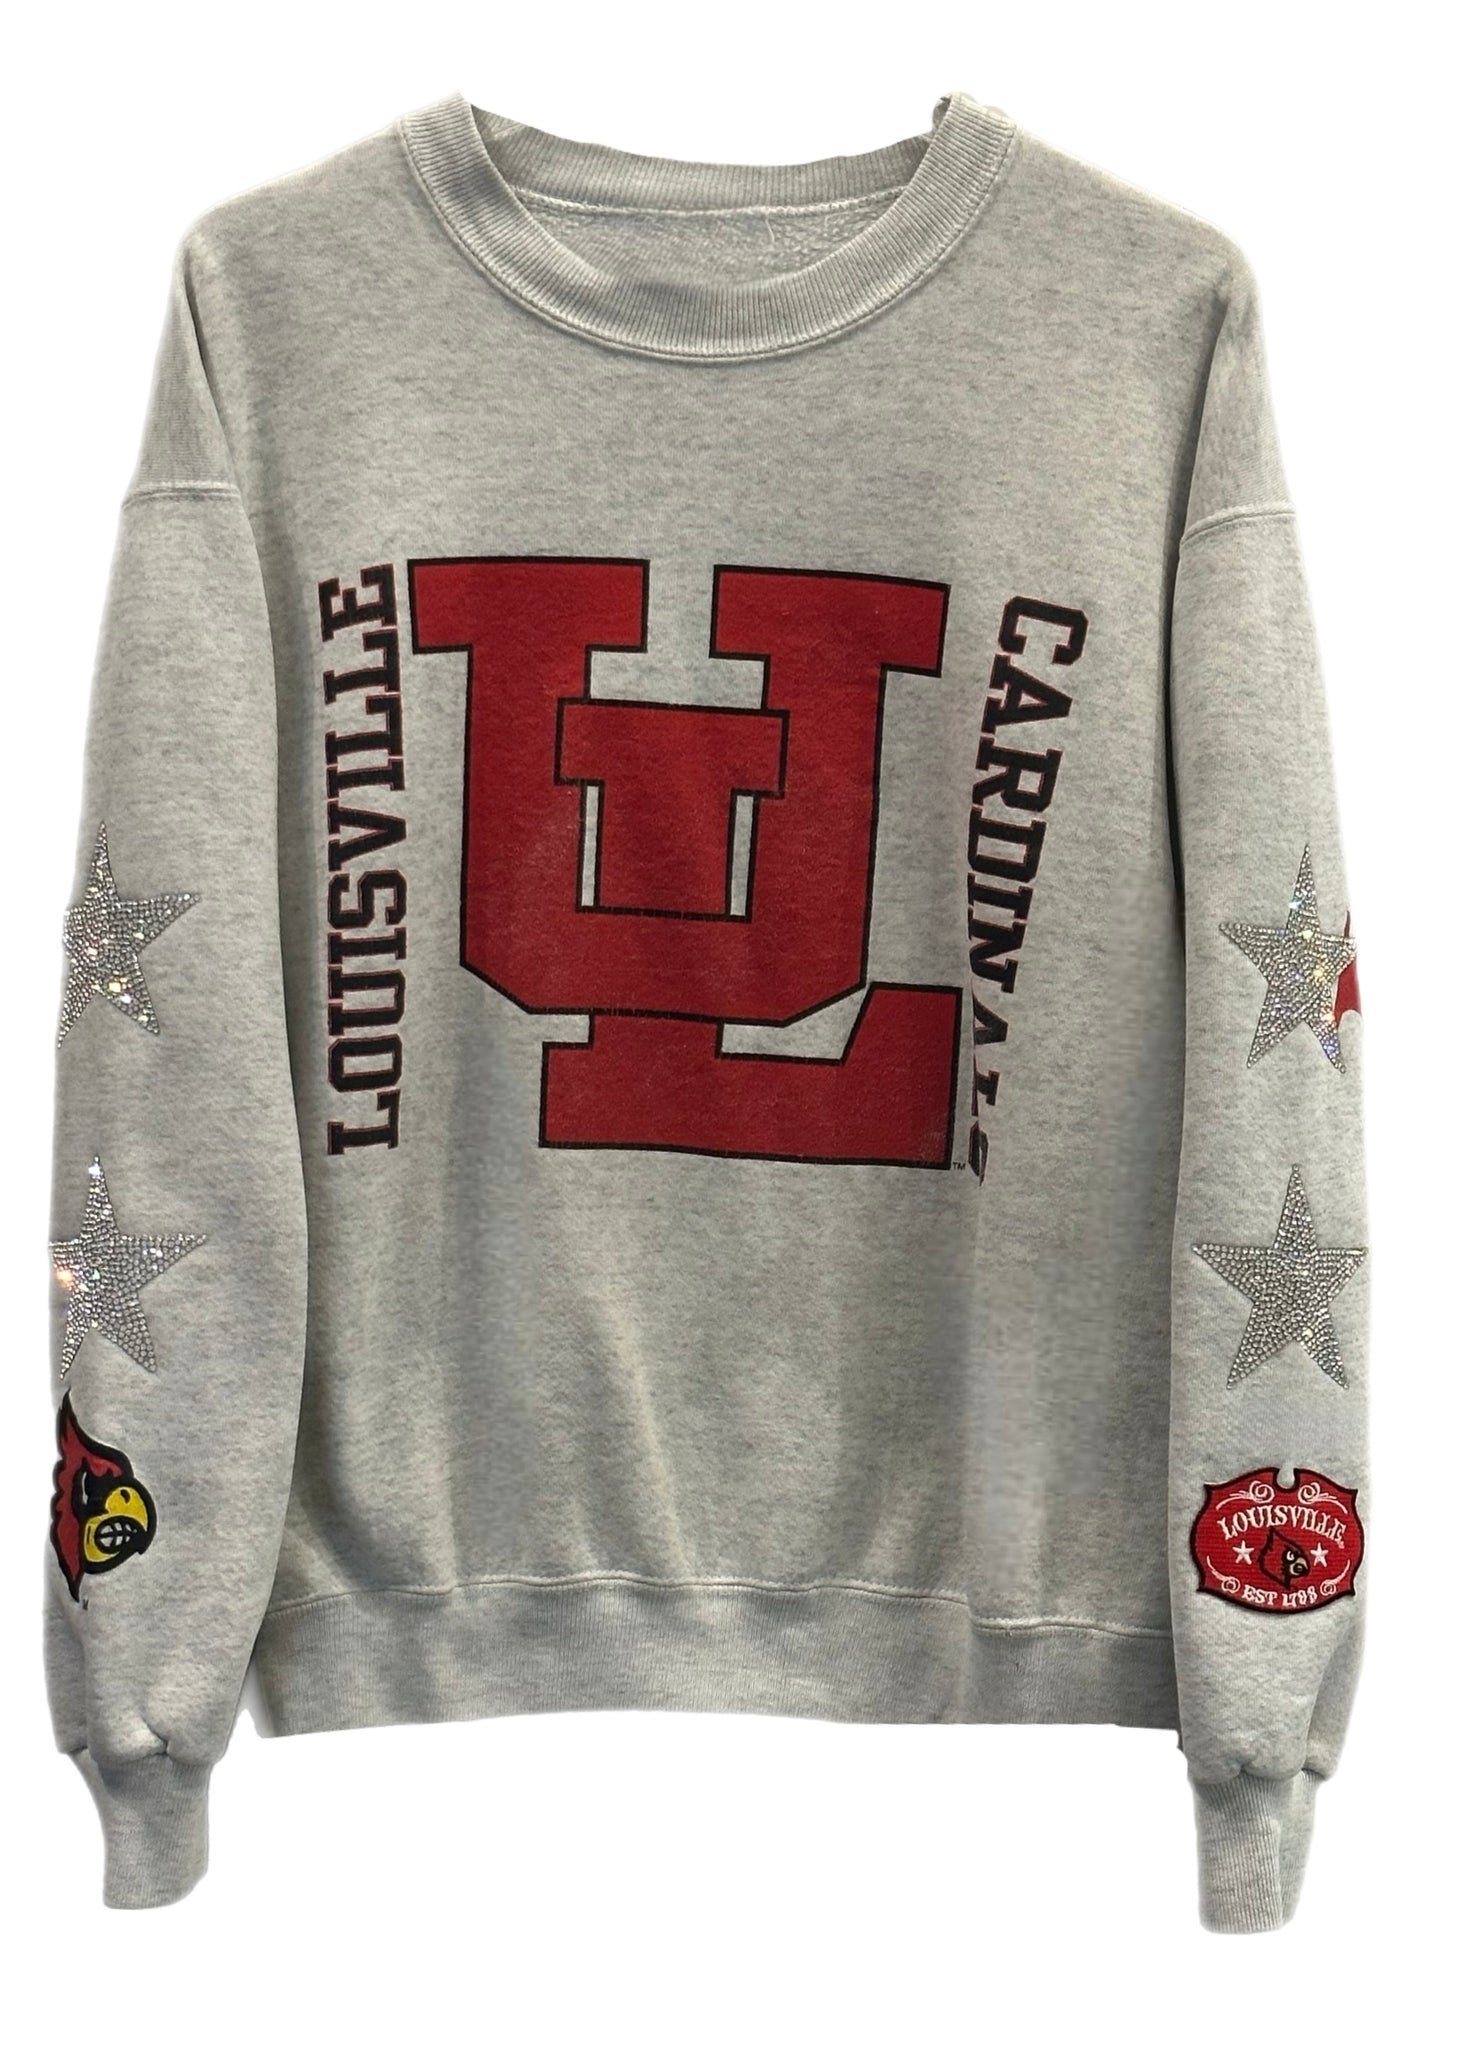 ShopCrystalRags University of Louisville, Cardinals, One of A Kind Vintage Sweatshirt with Crystal Star Design